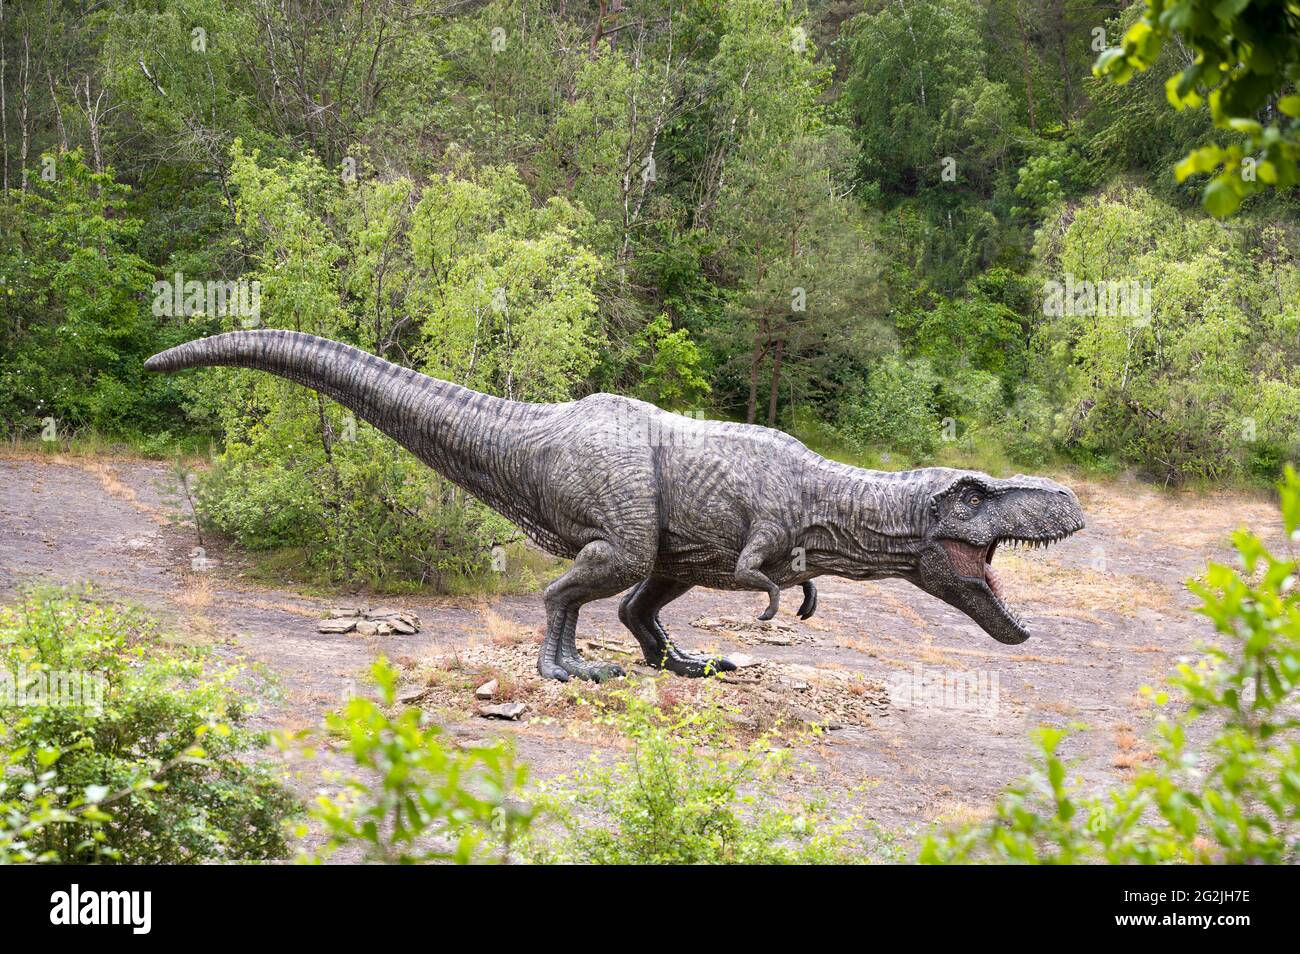 Dinosaur Tyrannosaurus as a model in Dinopark Münchehagen near Hanover. Lived in North America about 66 million years ago, was about 13m long and weighed 6t. Model: Wild Creations UK / Universal Pictures DE [M] Disturbing other dinosaurs, people and buildings have been retouched. Stock Photo